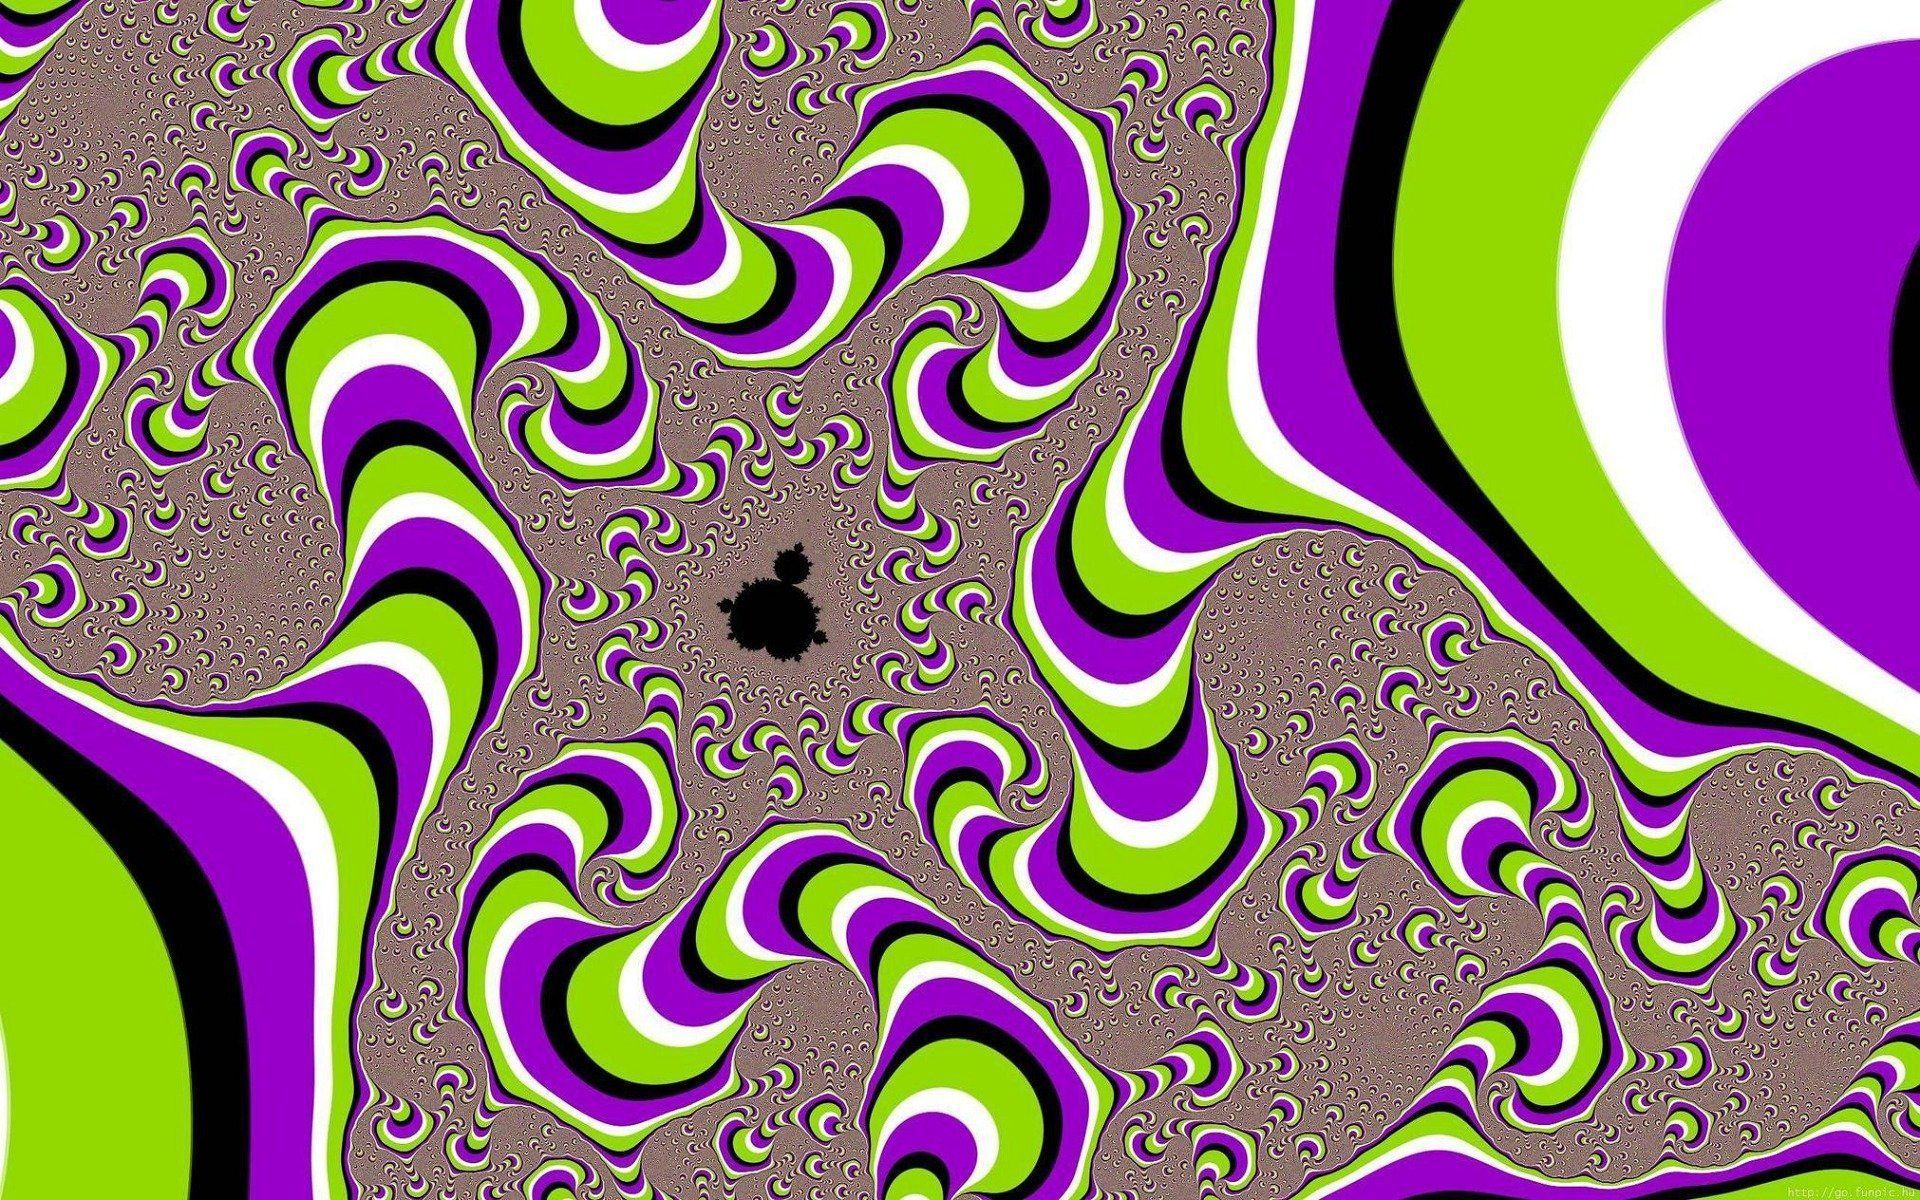 A purple and green abstract pattern with black dots - Clown